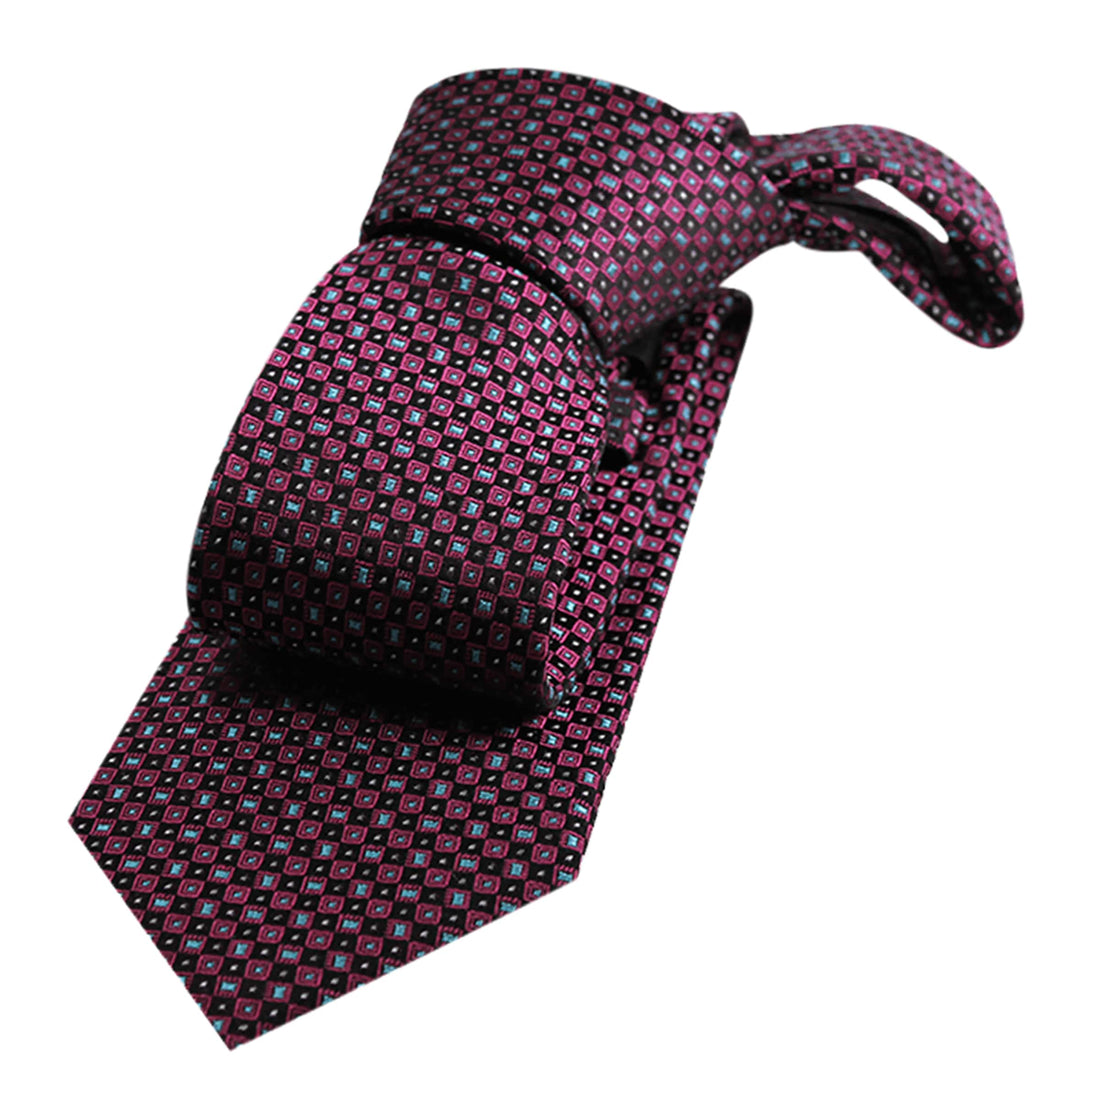 Men Long Tie, Packaging Type: Box, Size: 58 - 60 Inches